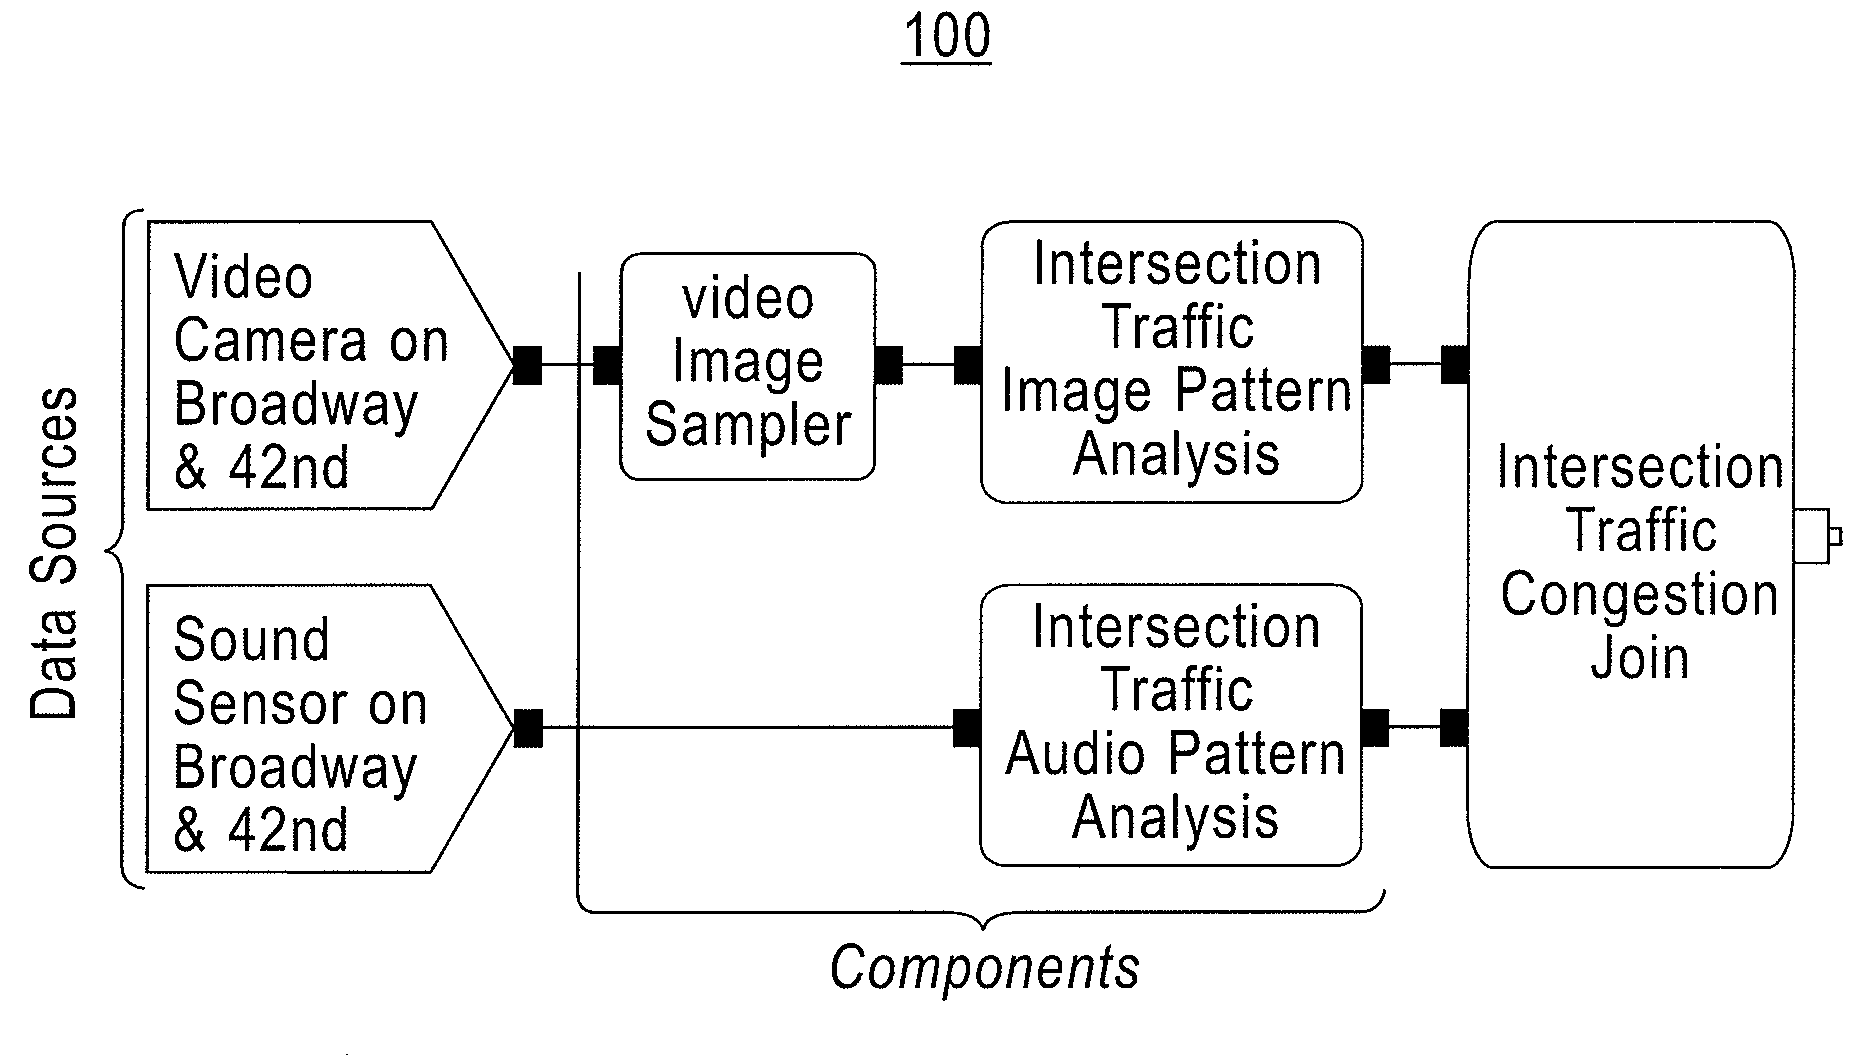 Method for modeling components of an information processing application using semantic graph transformations